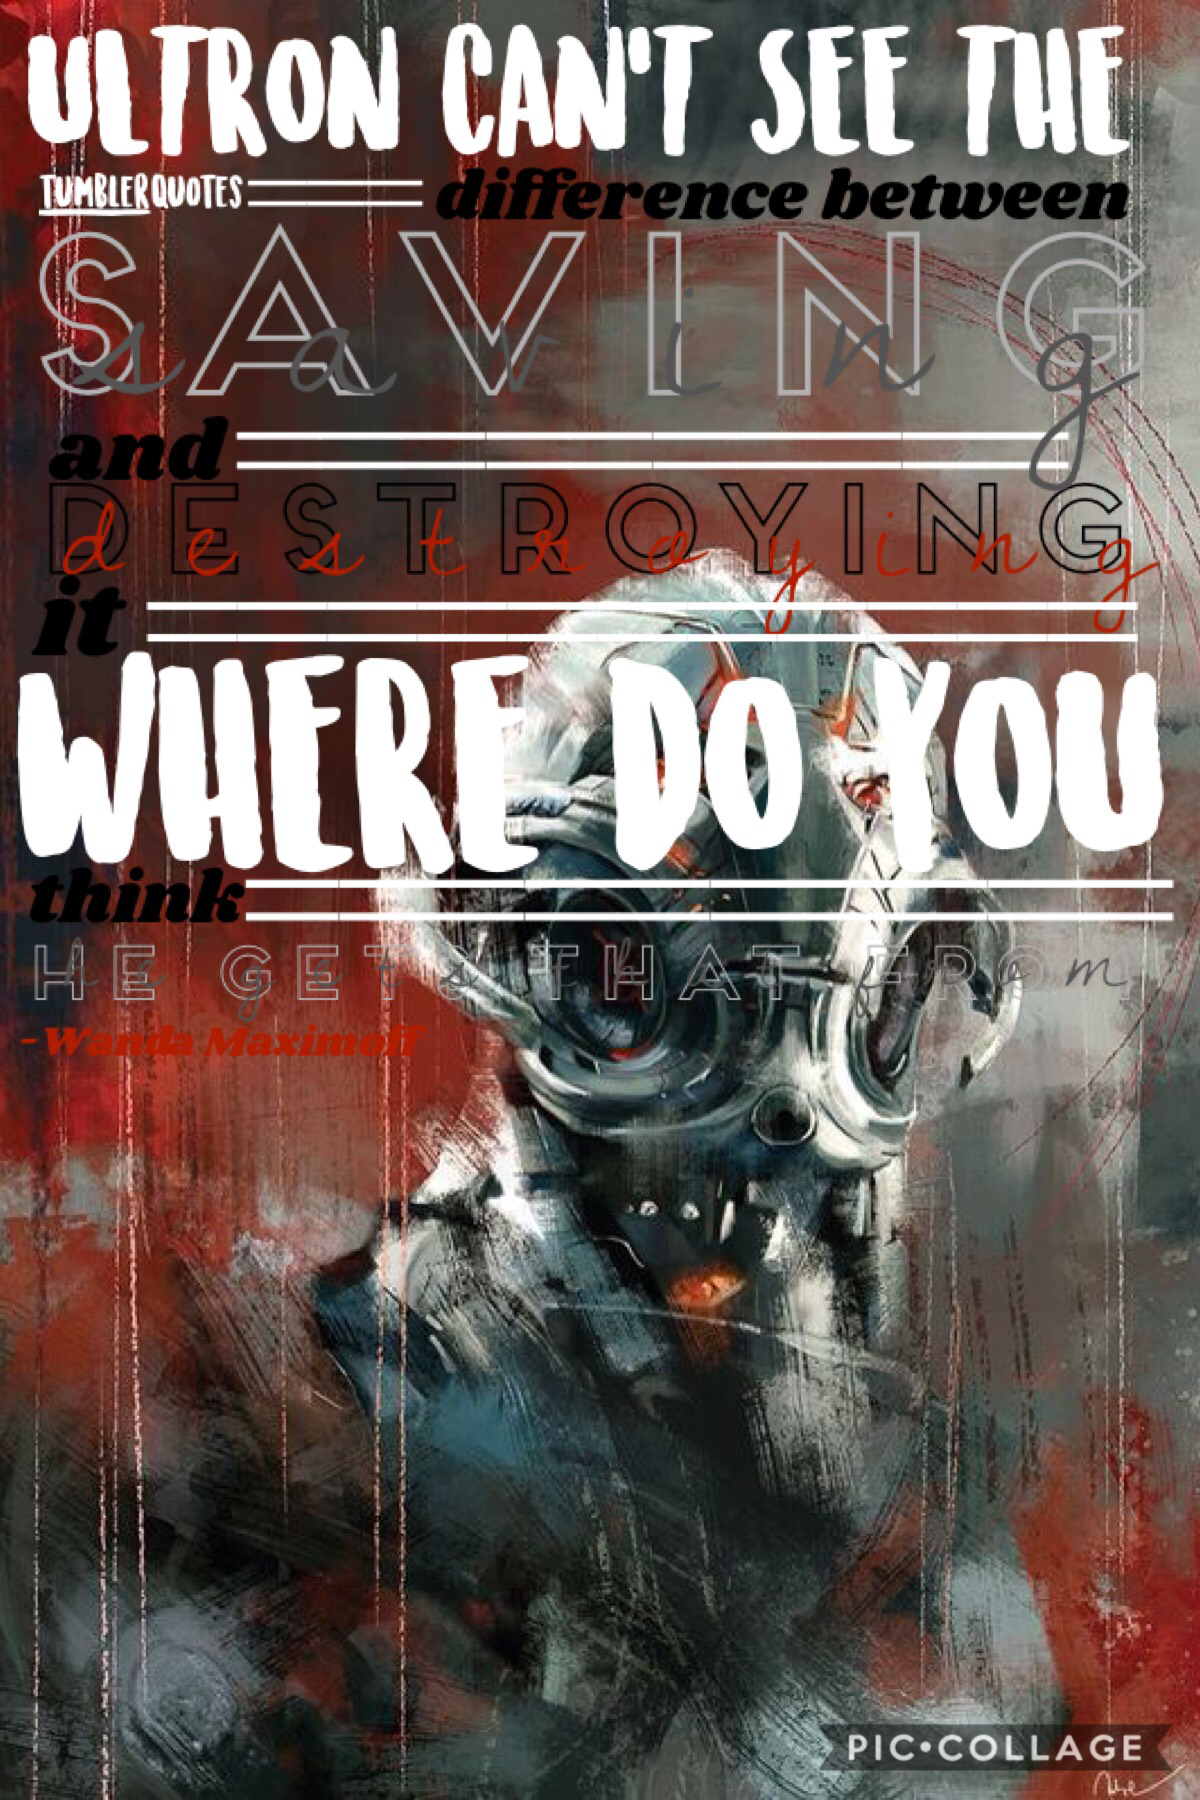 ❣️tap❣️
Sorry, a rly bad edit, but I really like this quote and it’s from one of my favorite movies.
“Ultron can’t see the difference between saving and destroying it. Where do you think he gets that from?” -Wanda Maximoff 